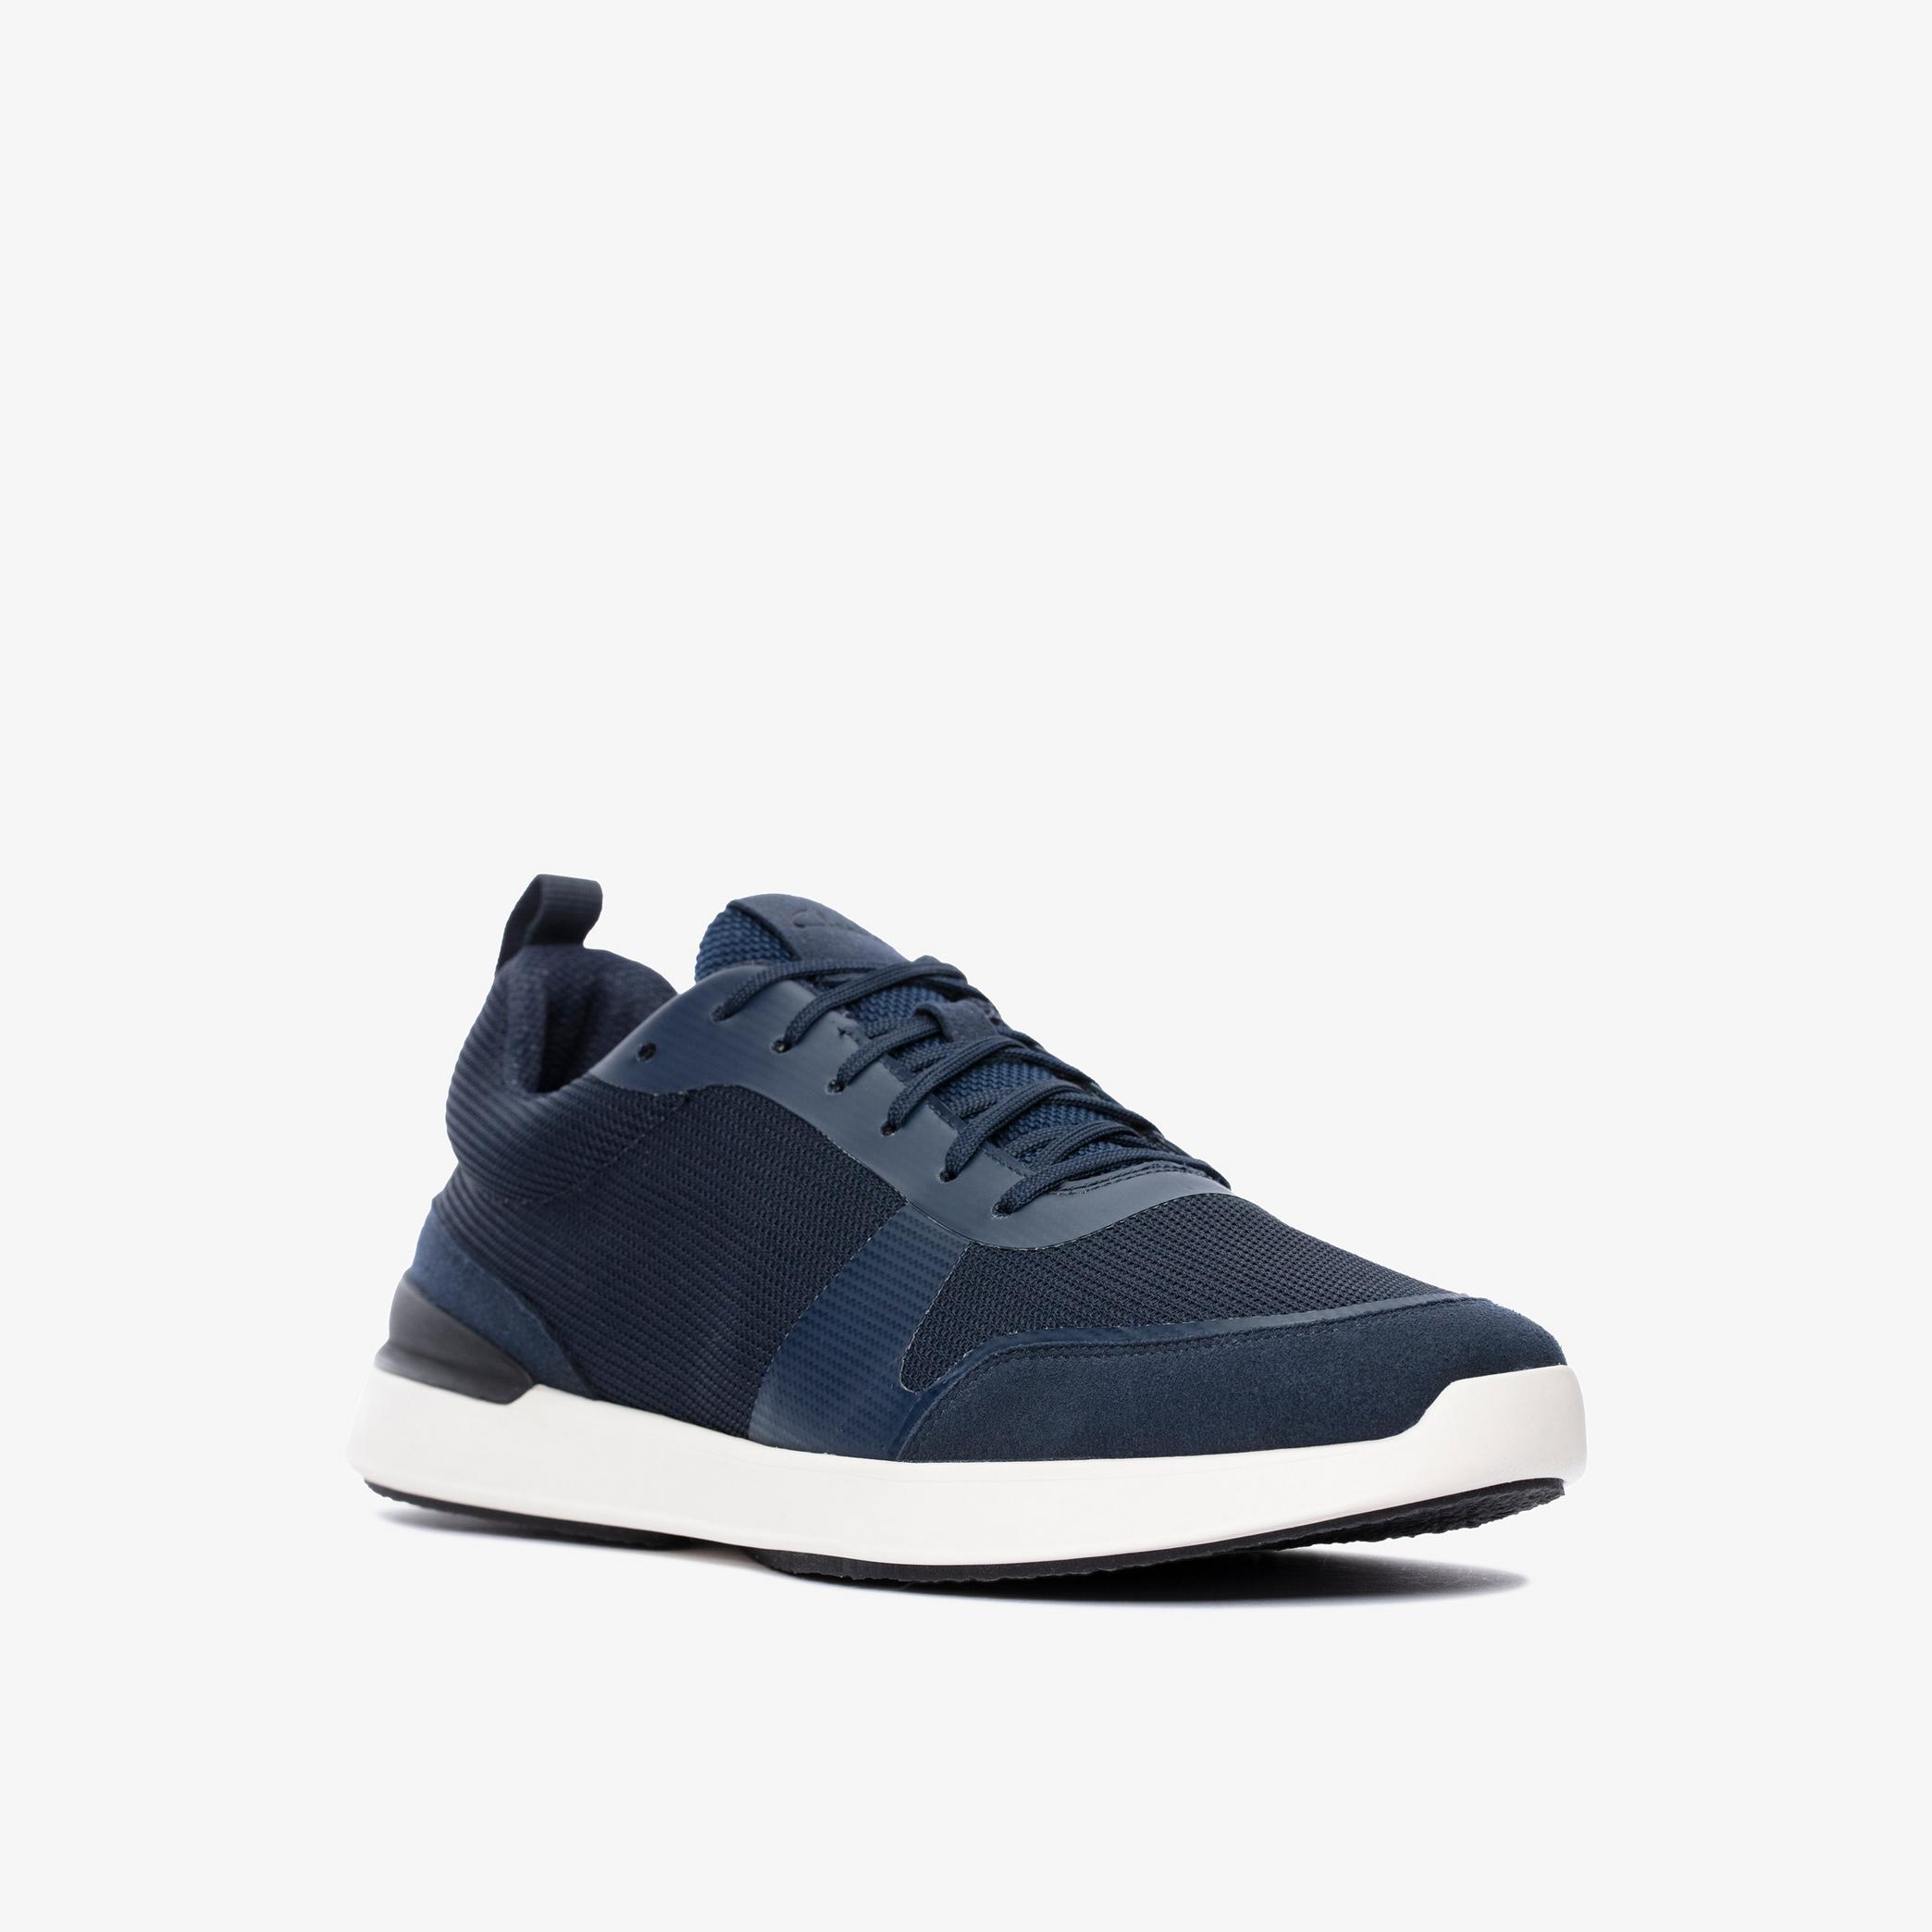 LT Lace Navy Knit Trainers, view 3 of 6